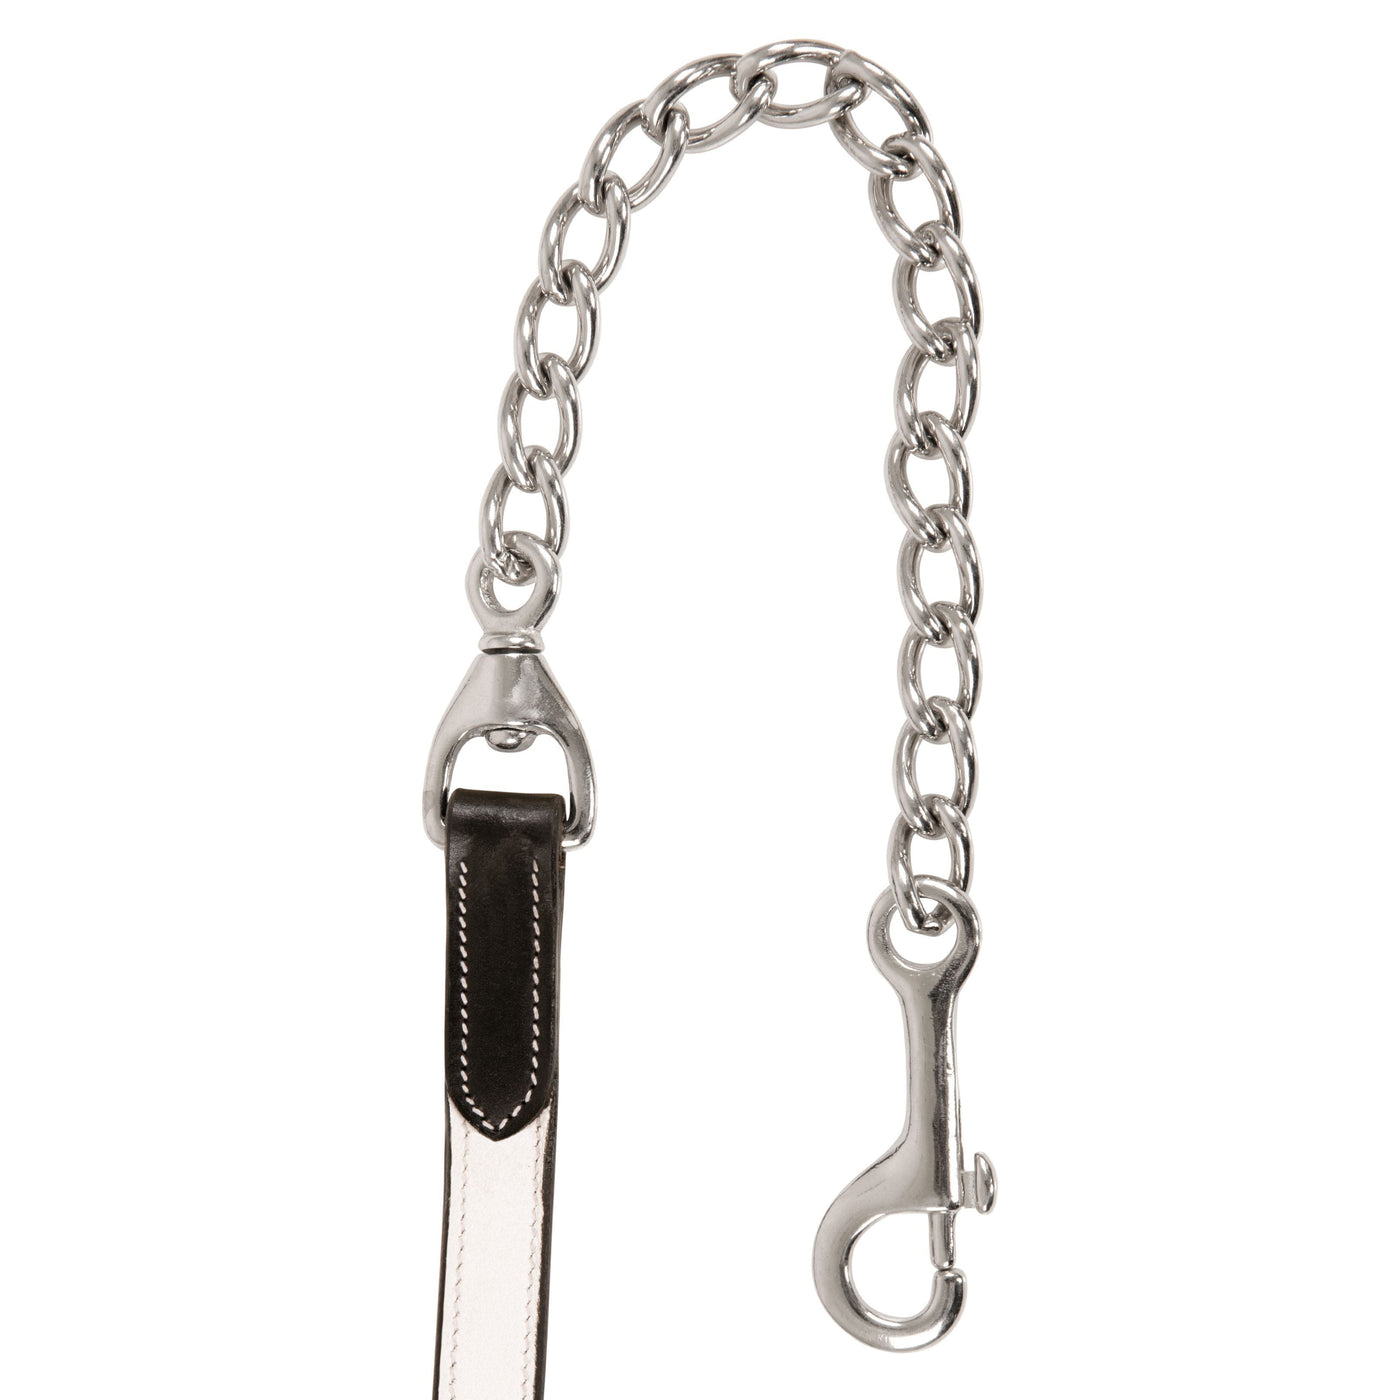 ExionPro Leather Soft Padded White Halter and Leather Lead with Chain Combo